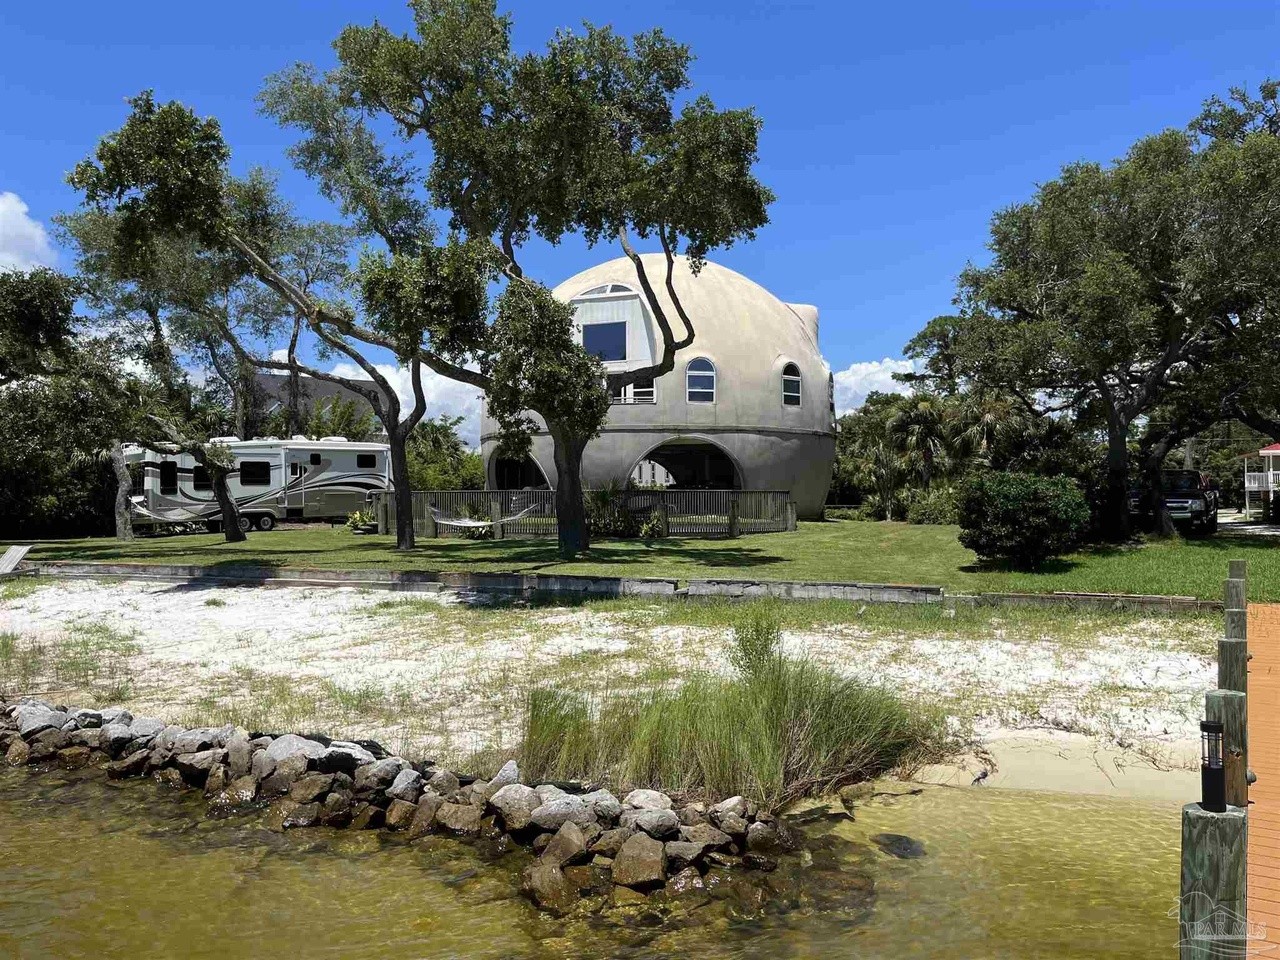 A rare Monolithic dome home is now for sale in Florida